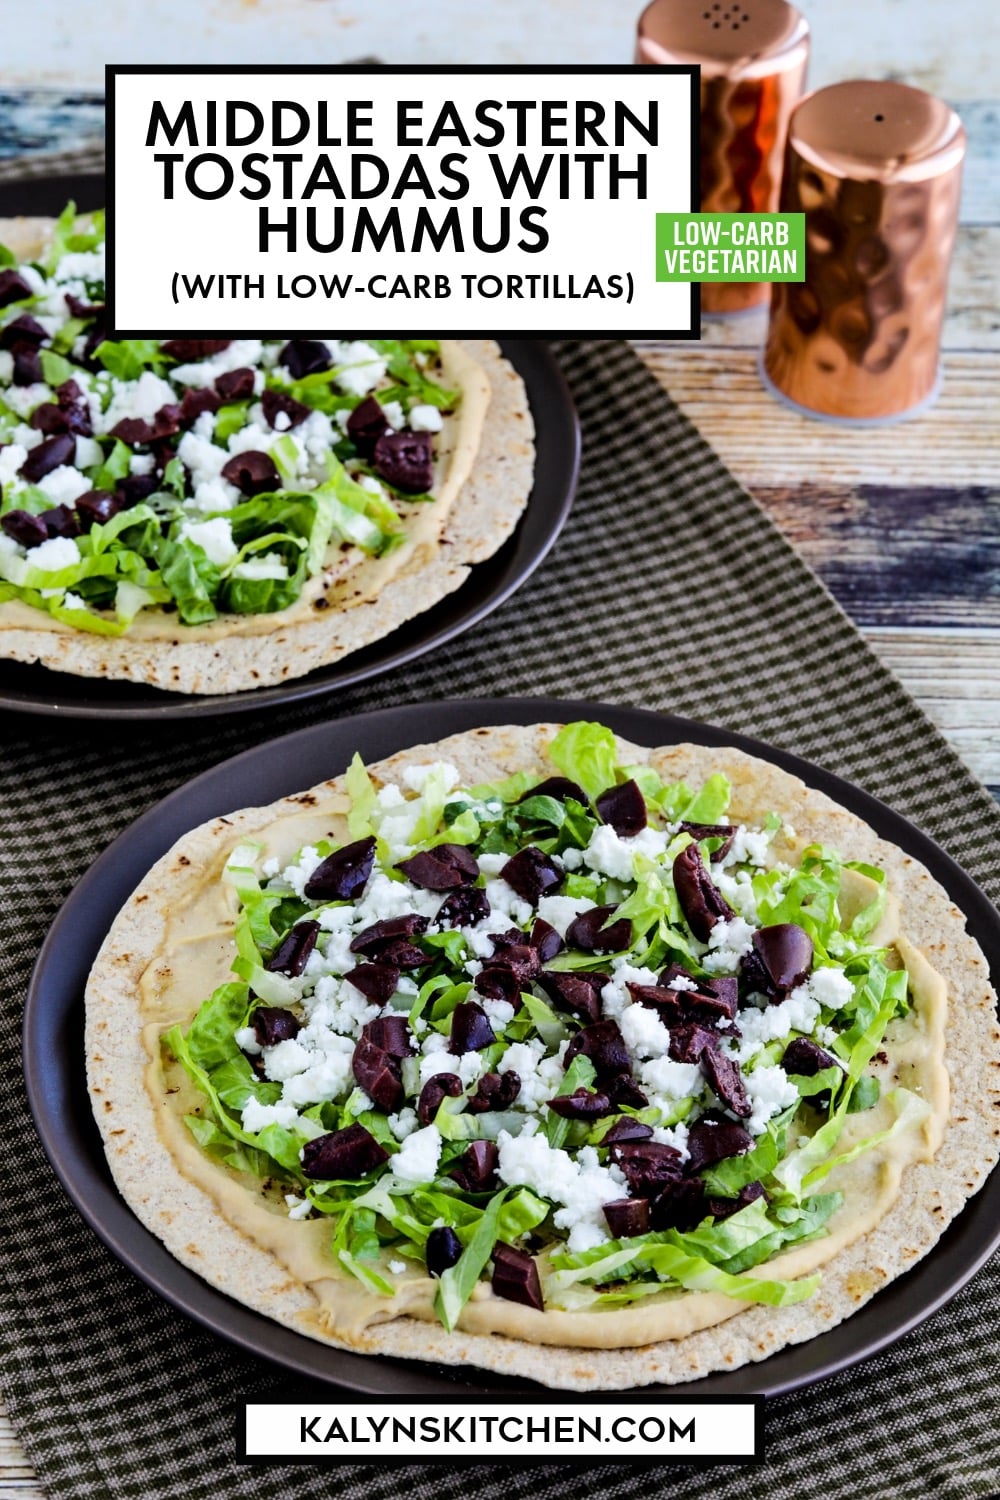 Pinterest image of Middle Eastern Tostadas with Hummus